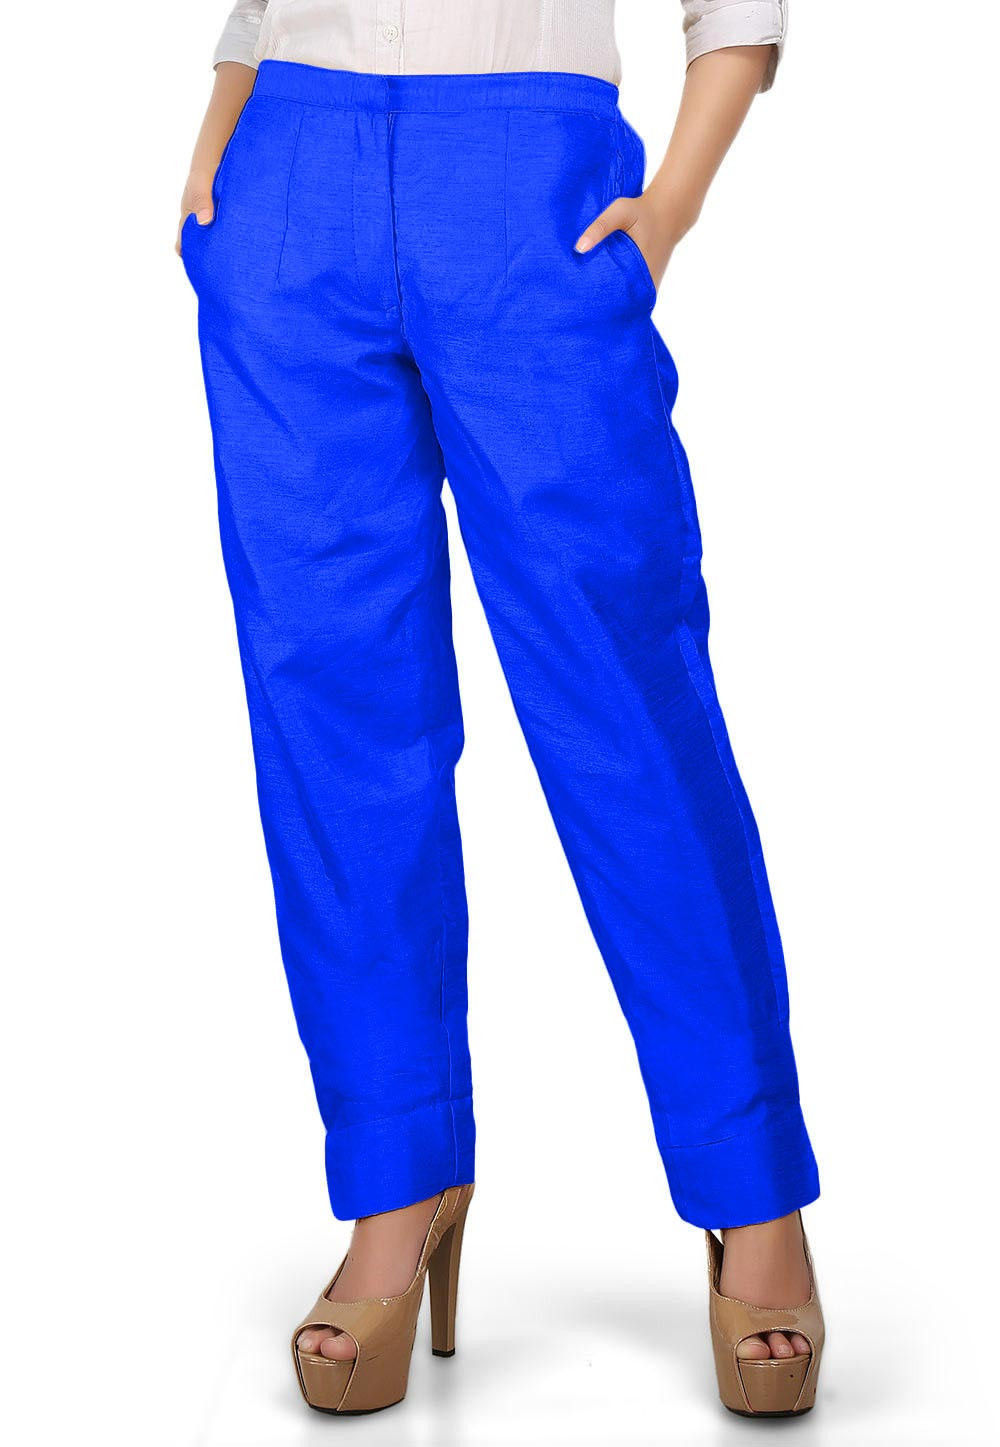 Buy Black and Royal Blue Combo of 2 Solid Women Regular Fit Trousers Cotton  Slub for Best Price Reviews Free Shipping